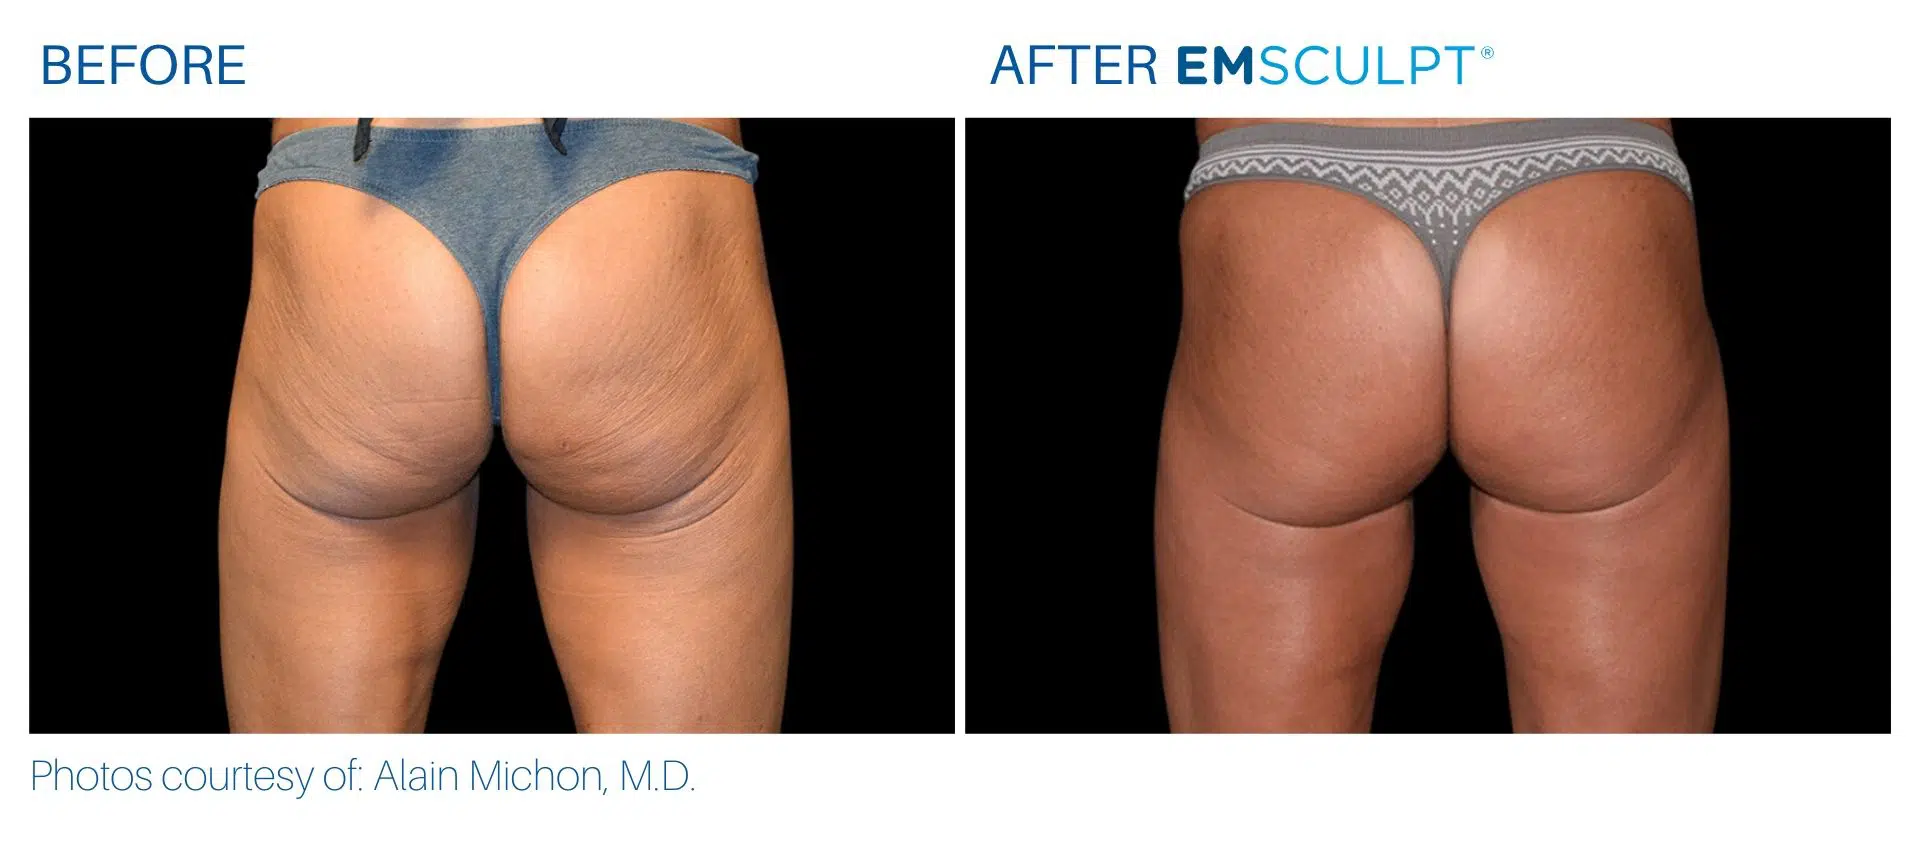 Emsculpt in Yonkers before and after images